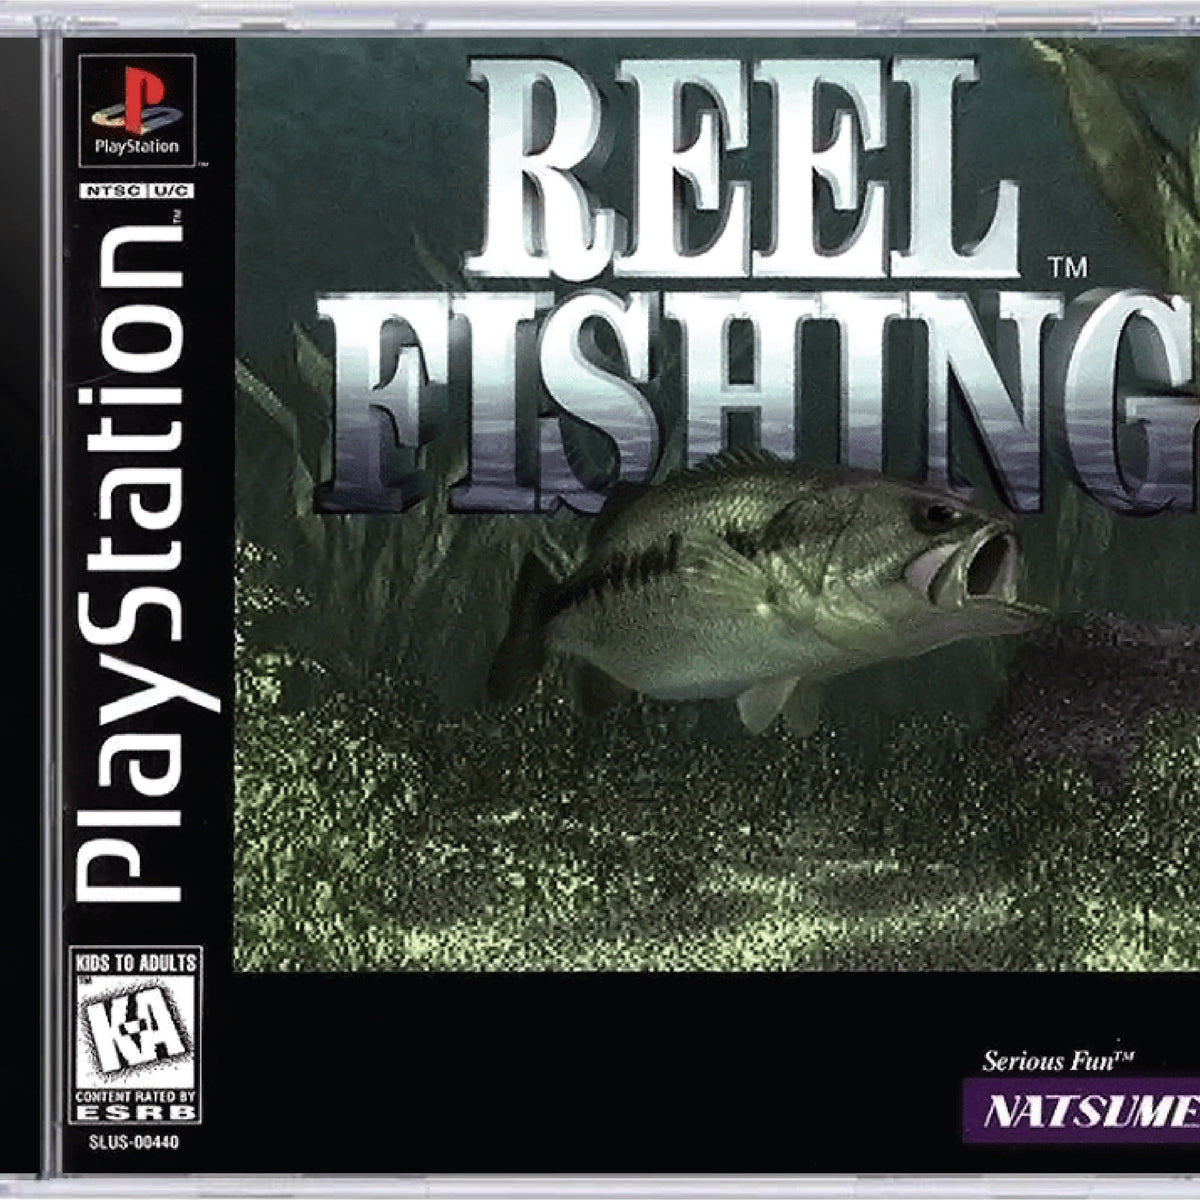 Reel Fishing for Sony PlayStation 1 (PS1)